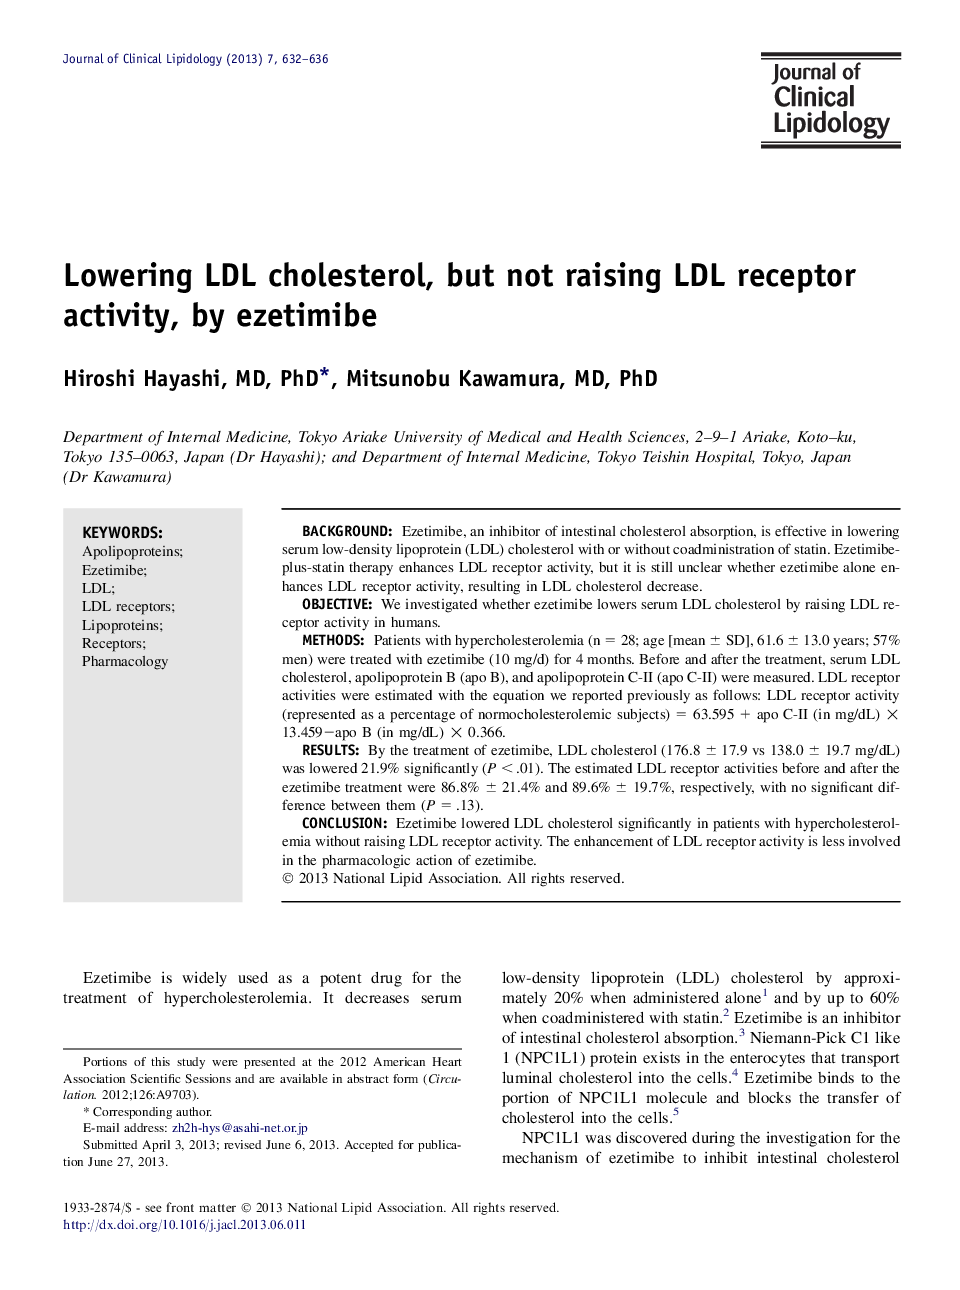 Lowering LDL cholesterol, but not raising LDL receptor activity, by ezetimibe